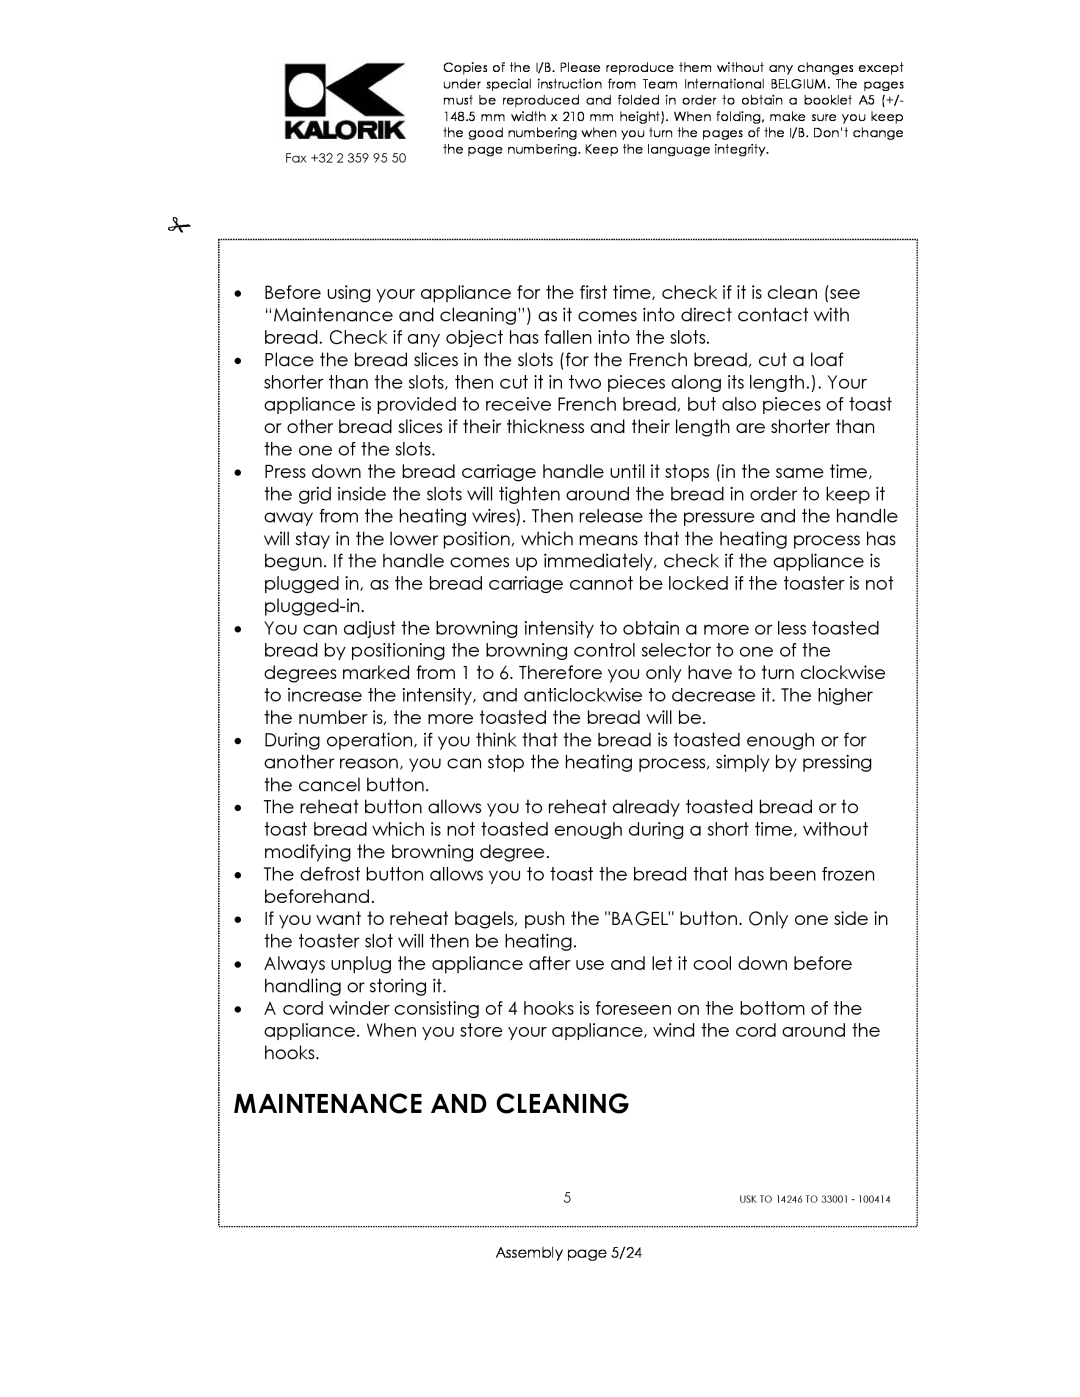 Kalorik 14246 - 33001 manual Maintenance And Cleaning, Assembly page 5/24 